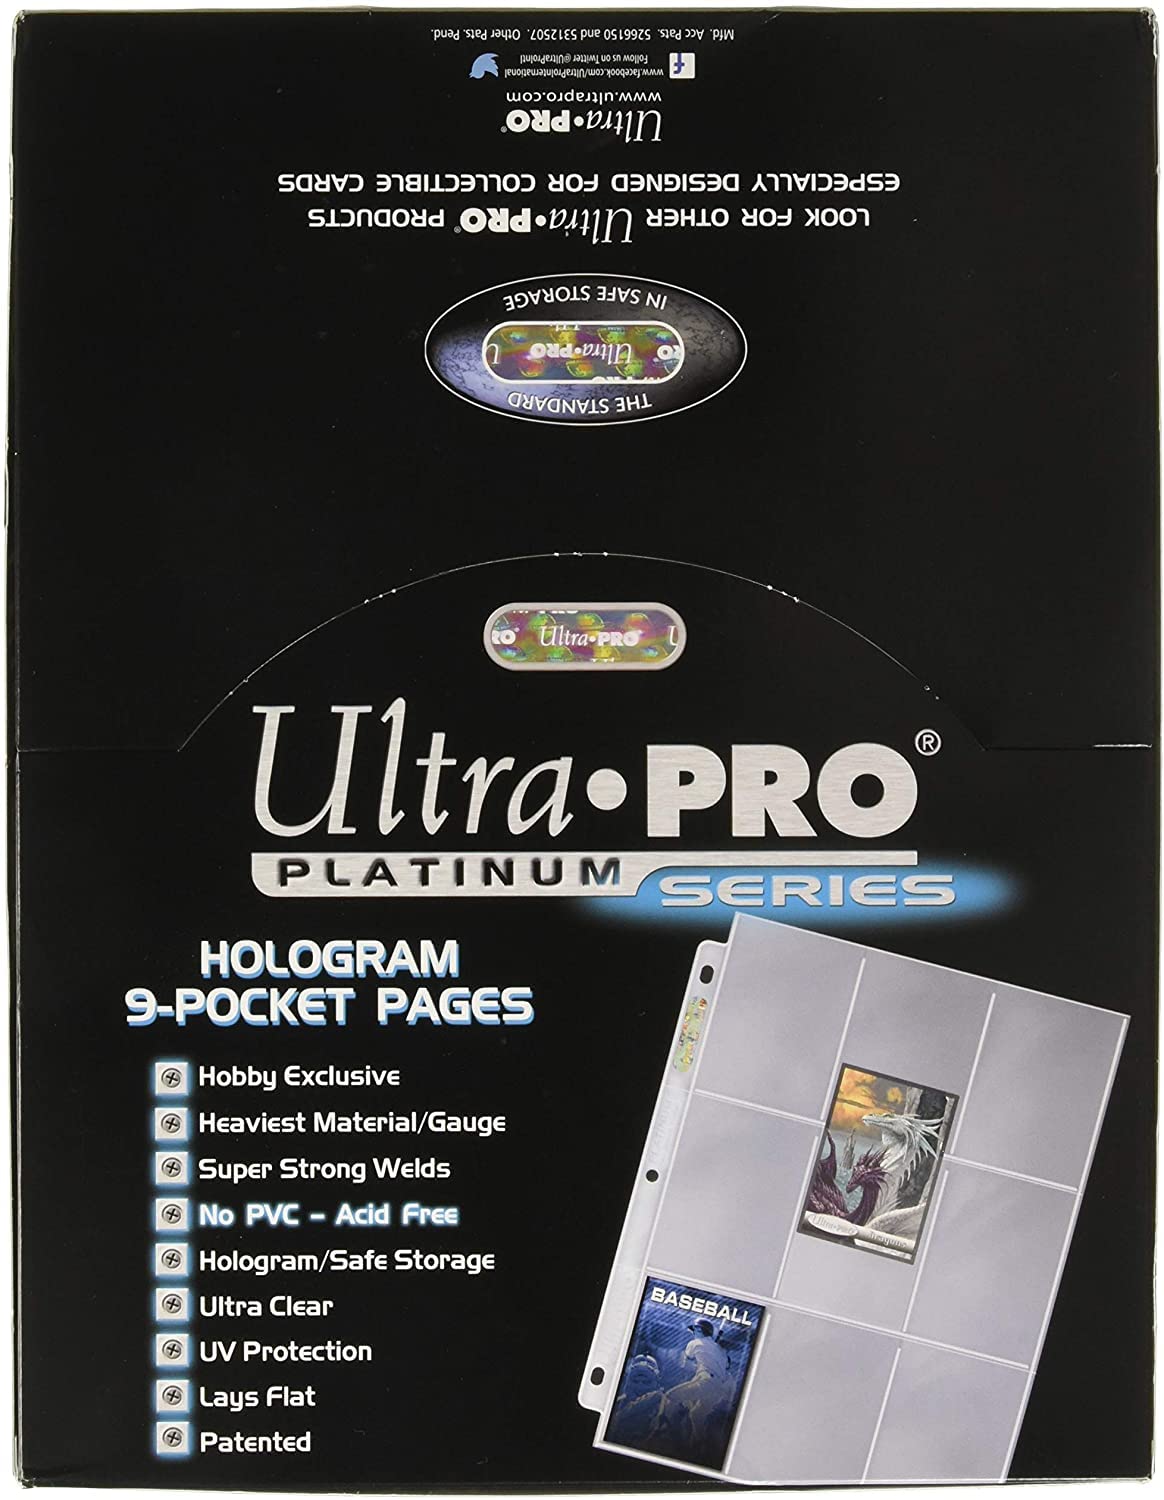 Ultra Pro 9 Pocket Pages Platinum Series 100 Pages of Card Sleeves